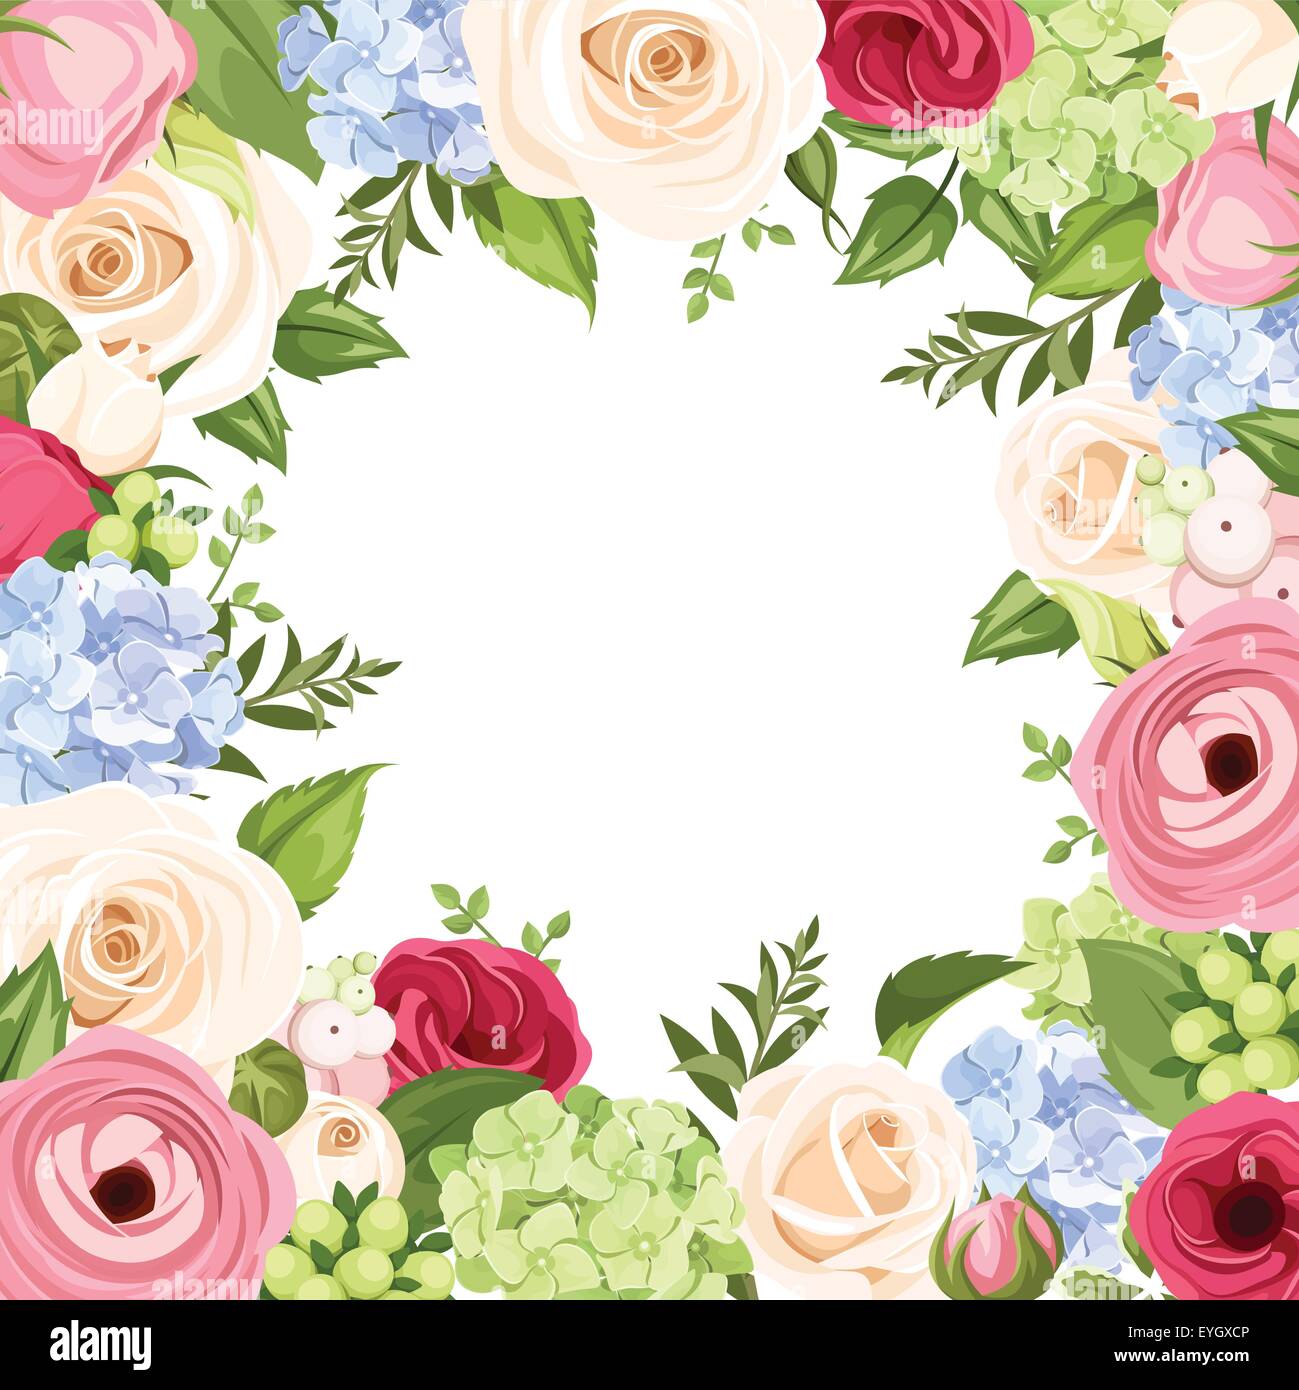 Background with colorful flowers. Vector illustration. Stock Vector